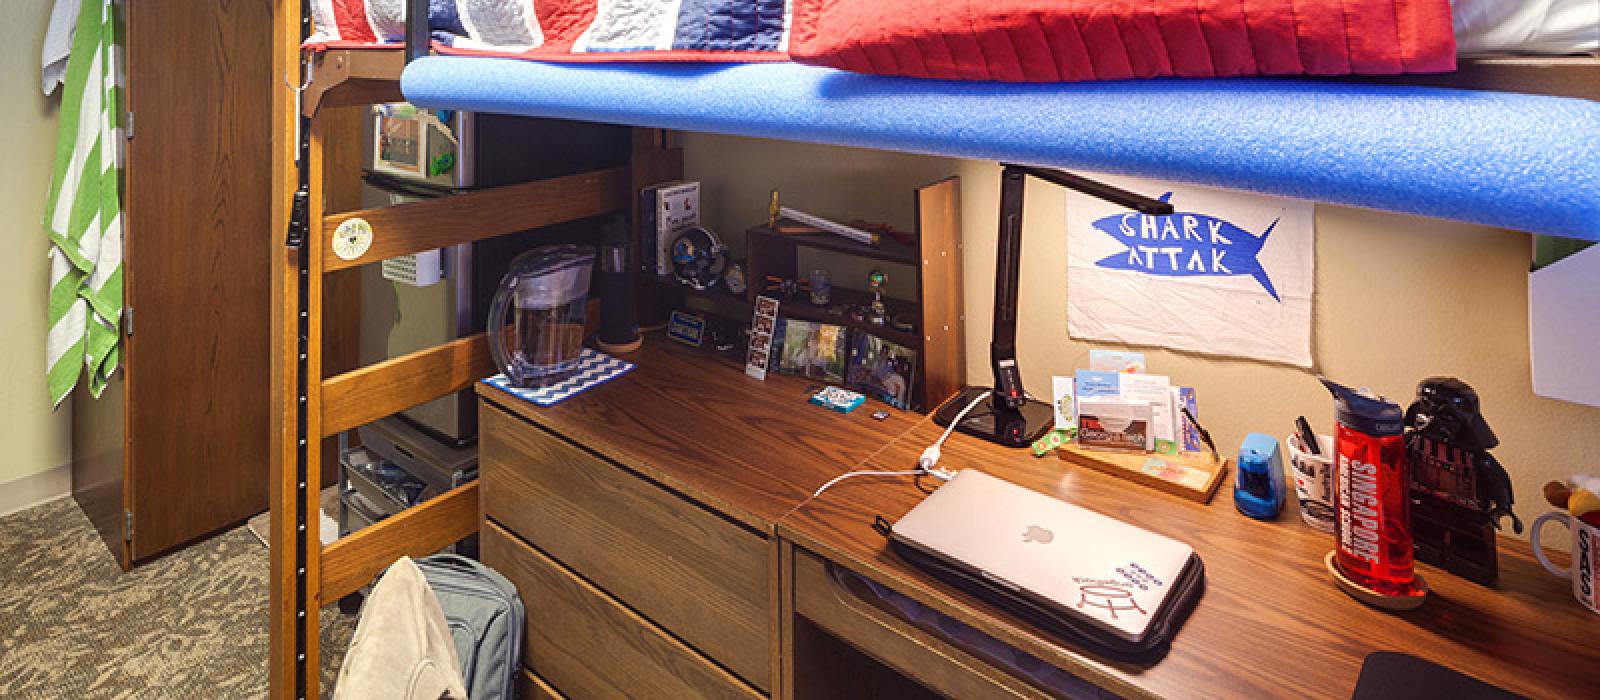 A desk under a bunk bed. THe desk has a laptop computer, desk lamp and other study items.